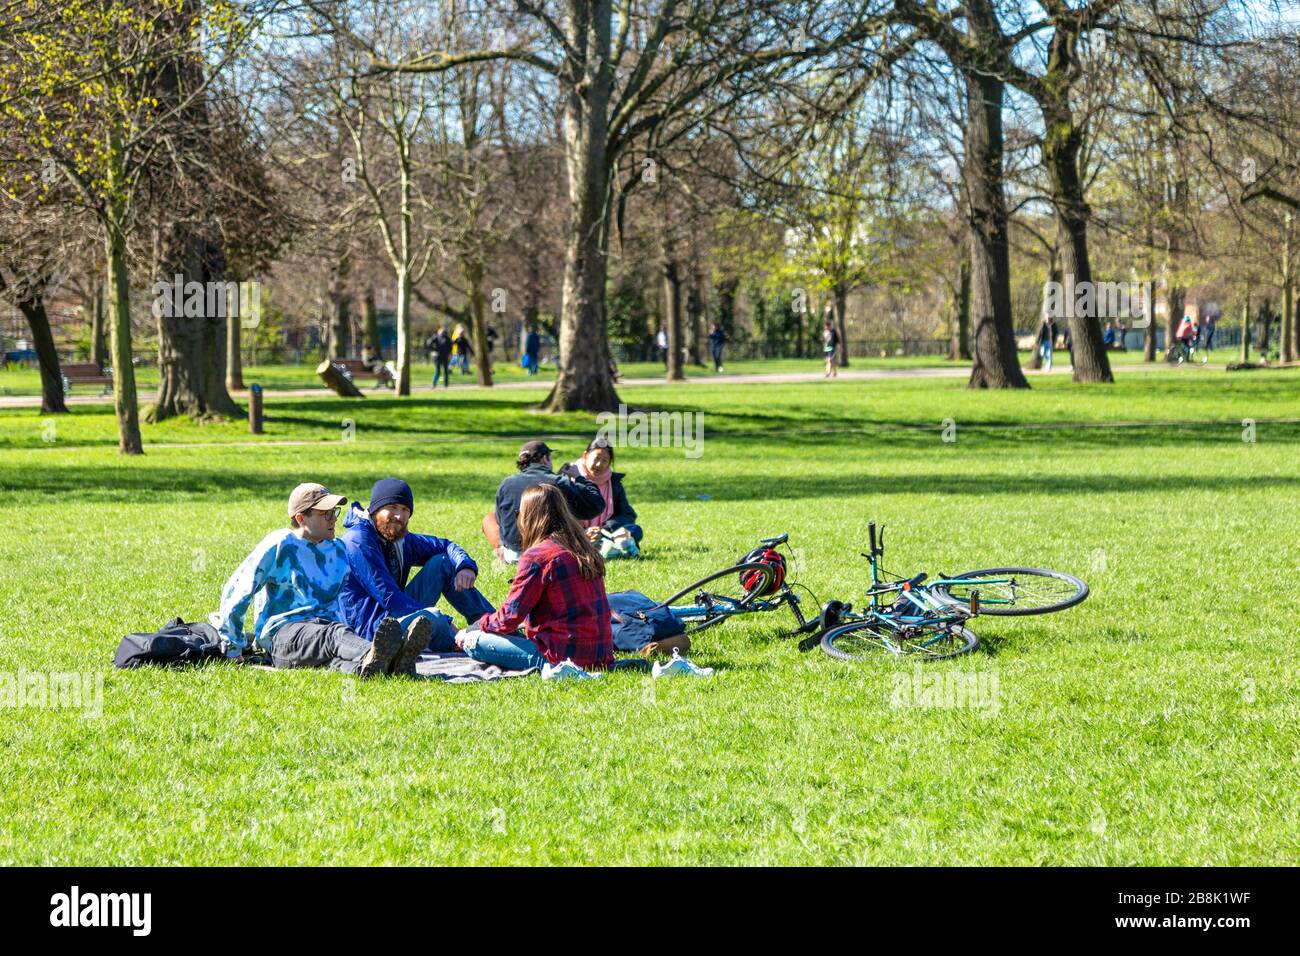 22 March 2020 - London, UK - global coronavirus pandemic, big groups of people visiting Victoria Park despite government urging people to stay at home and practice social distancing to prevent the spread of the coronavirus Covid-19, people having a picnic in the park Stock Photo